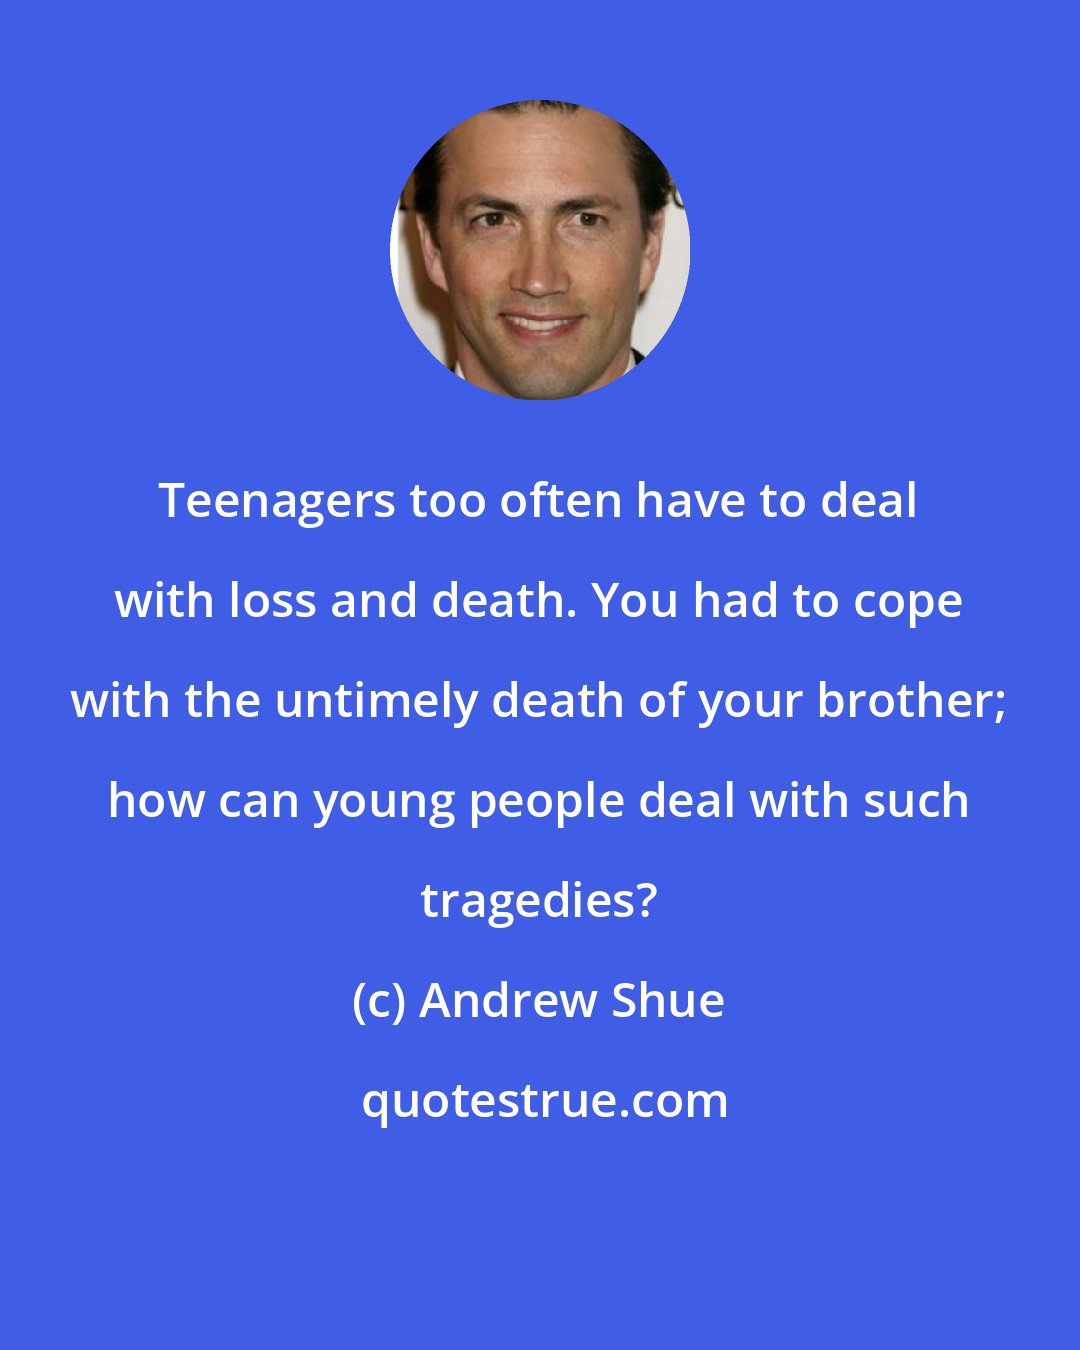 Andrew Shue: Teenagers too often have to deal with loss and death. You had to cope with the untimely death of your brother; how can young people deal with such tragedies?